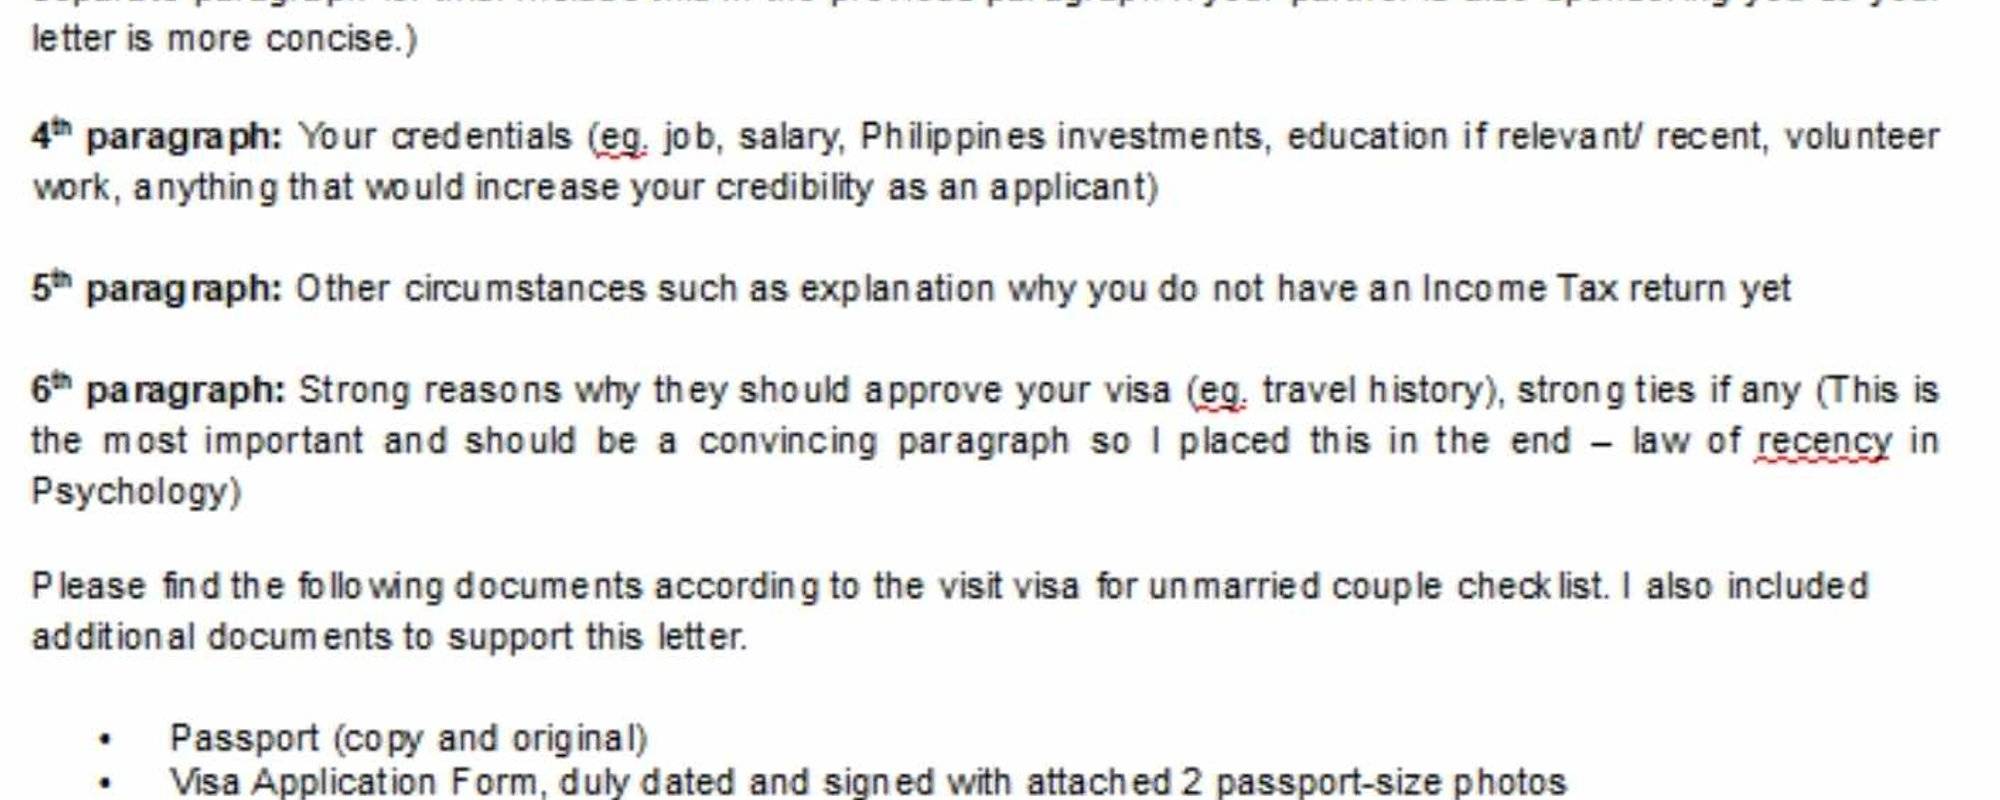 Germany Visa Application Cover Letter Template